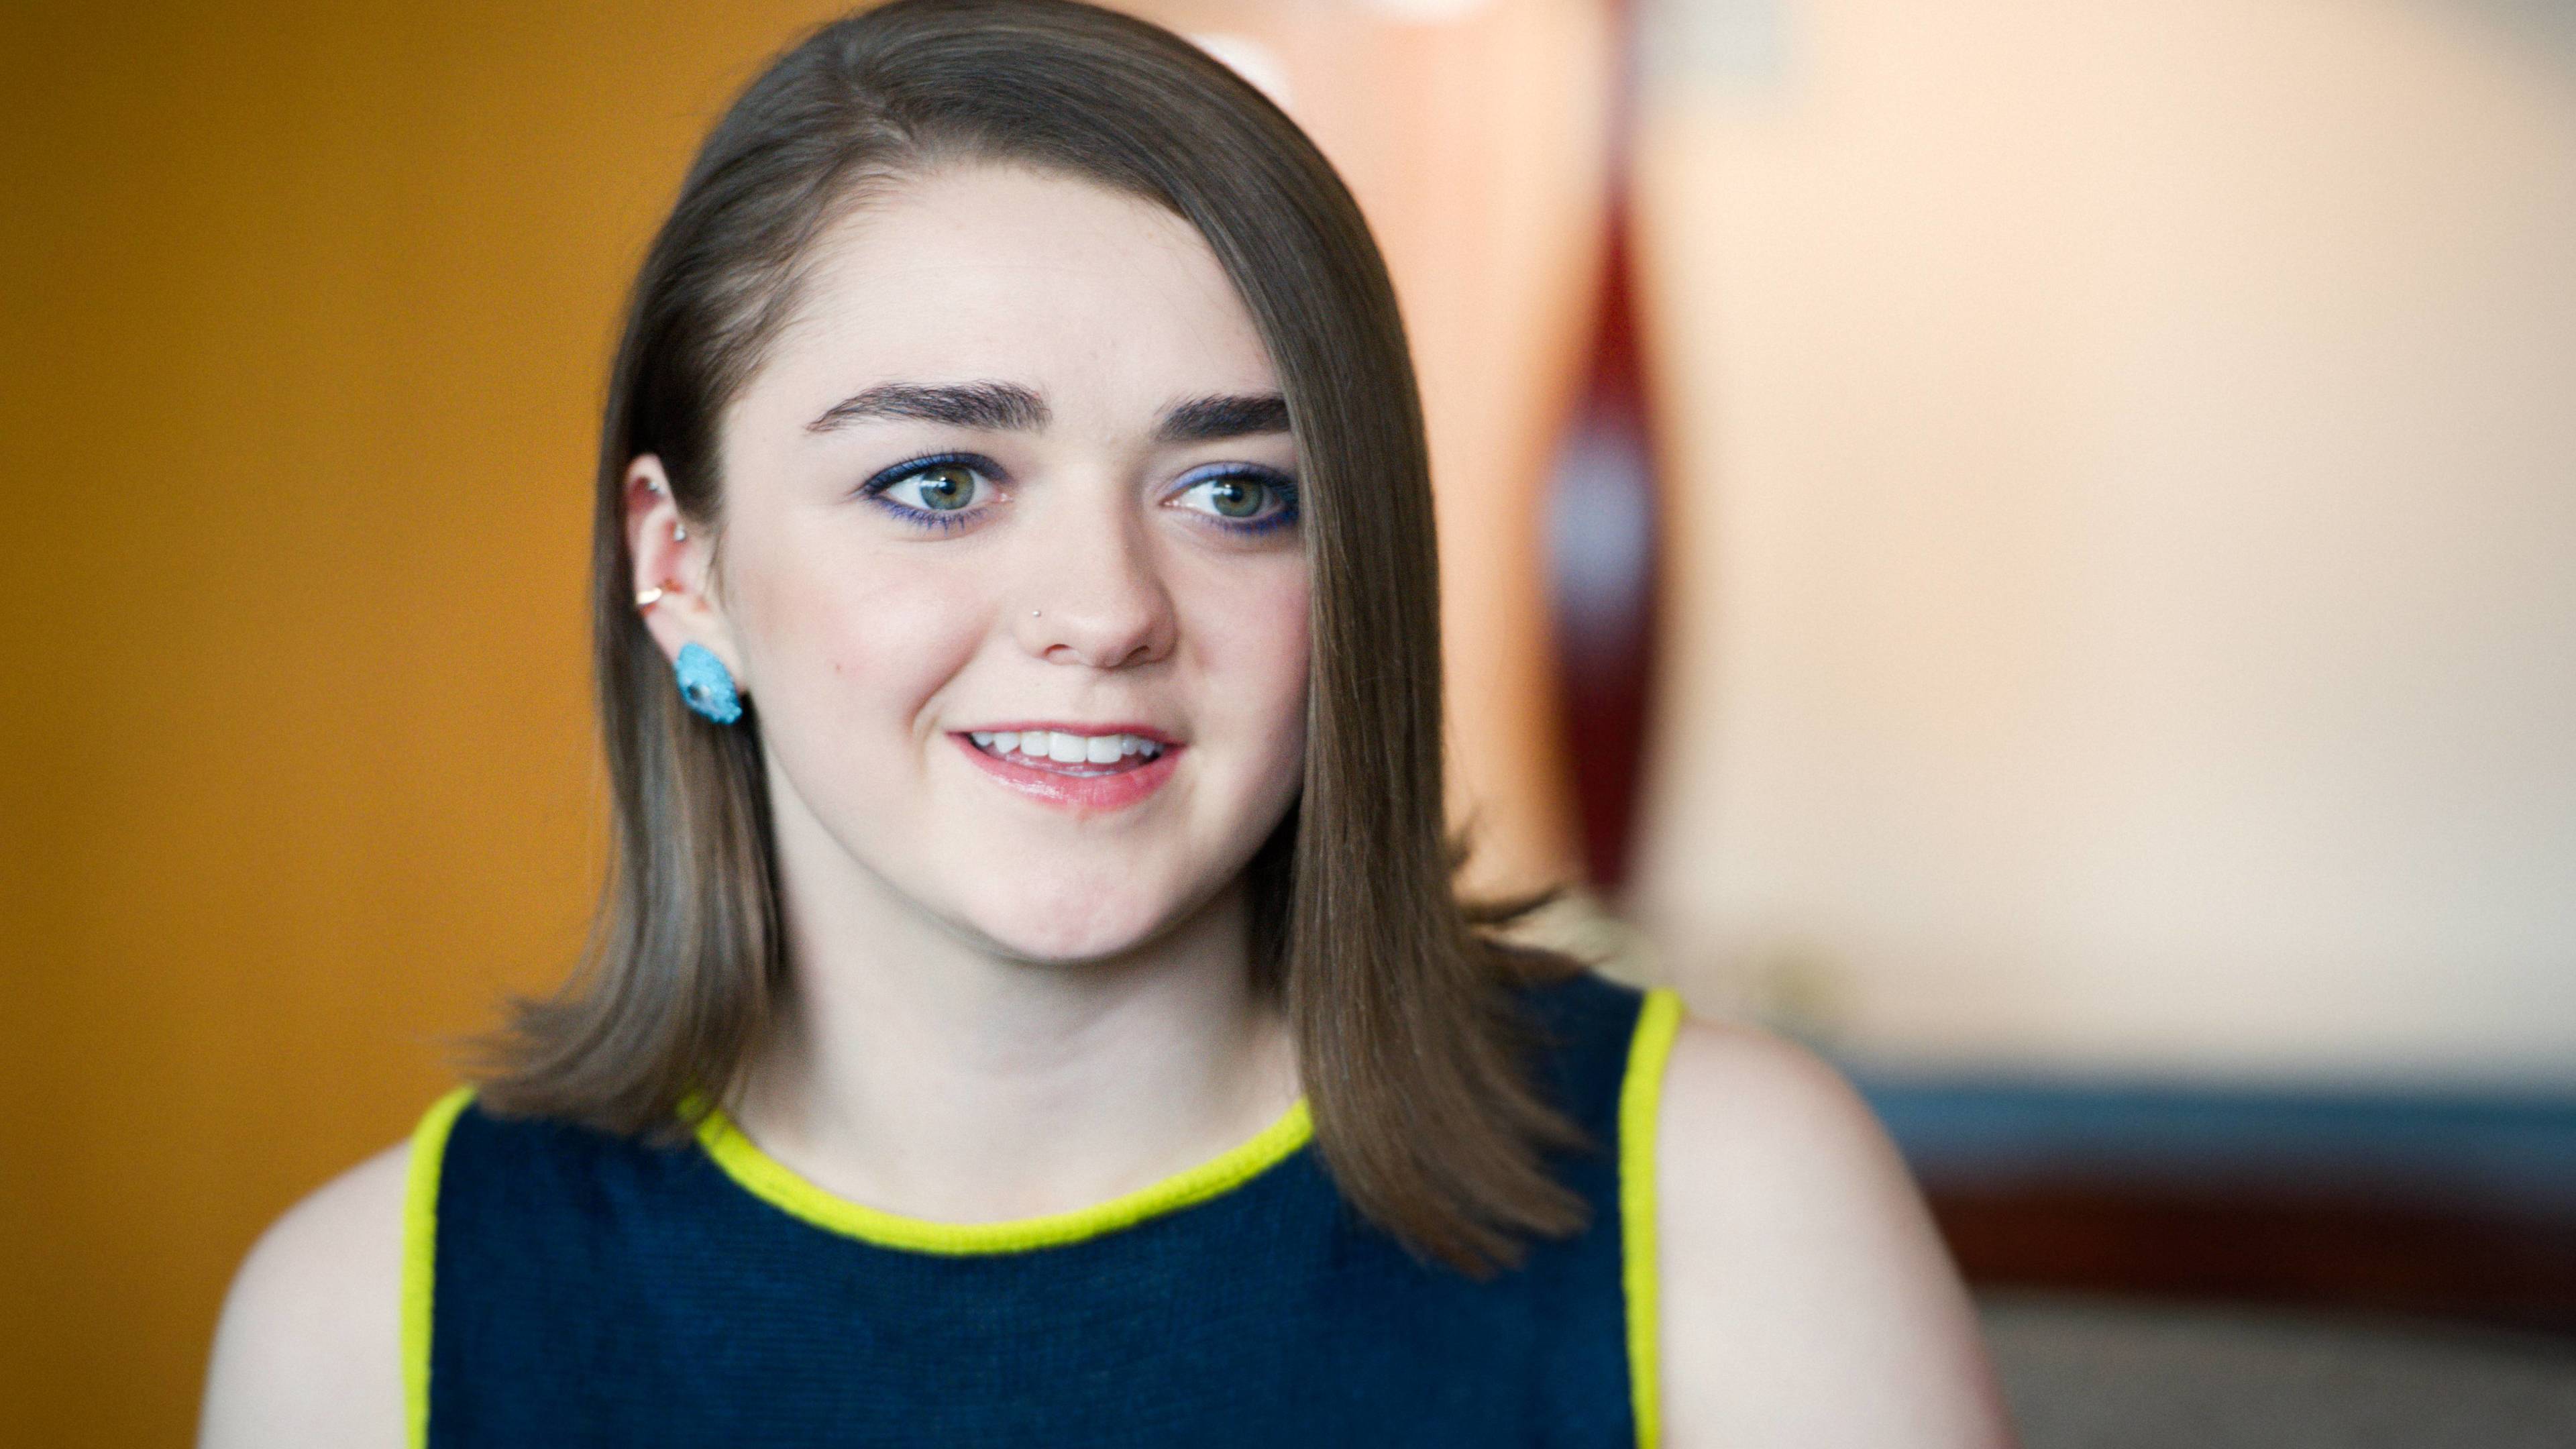 Maisie Williams 2020 Wallpapers